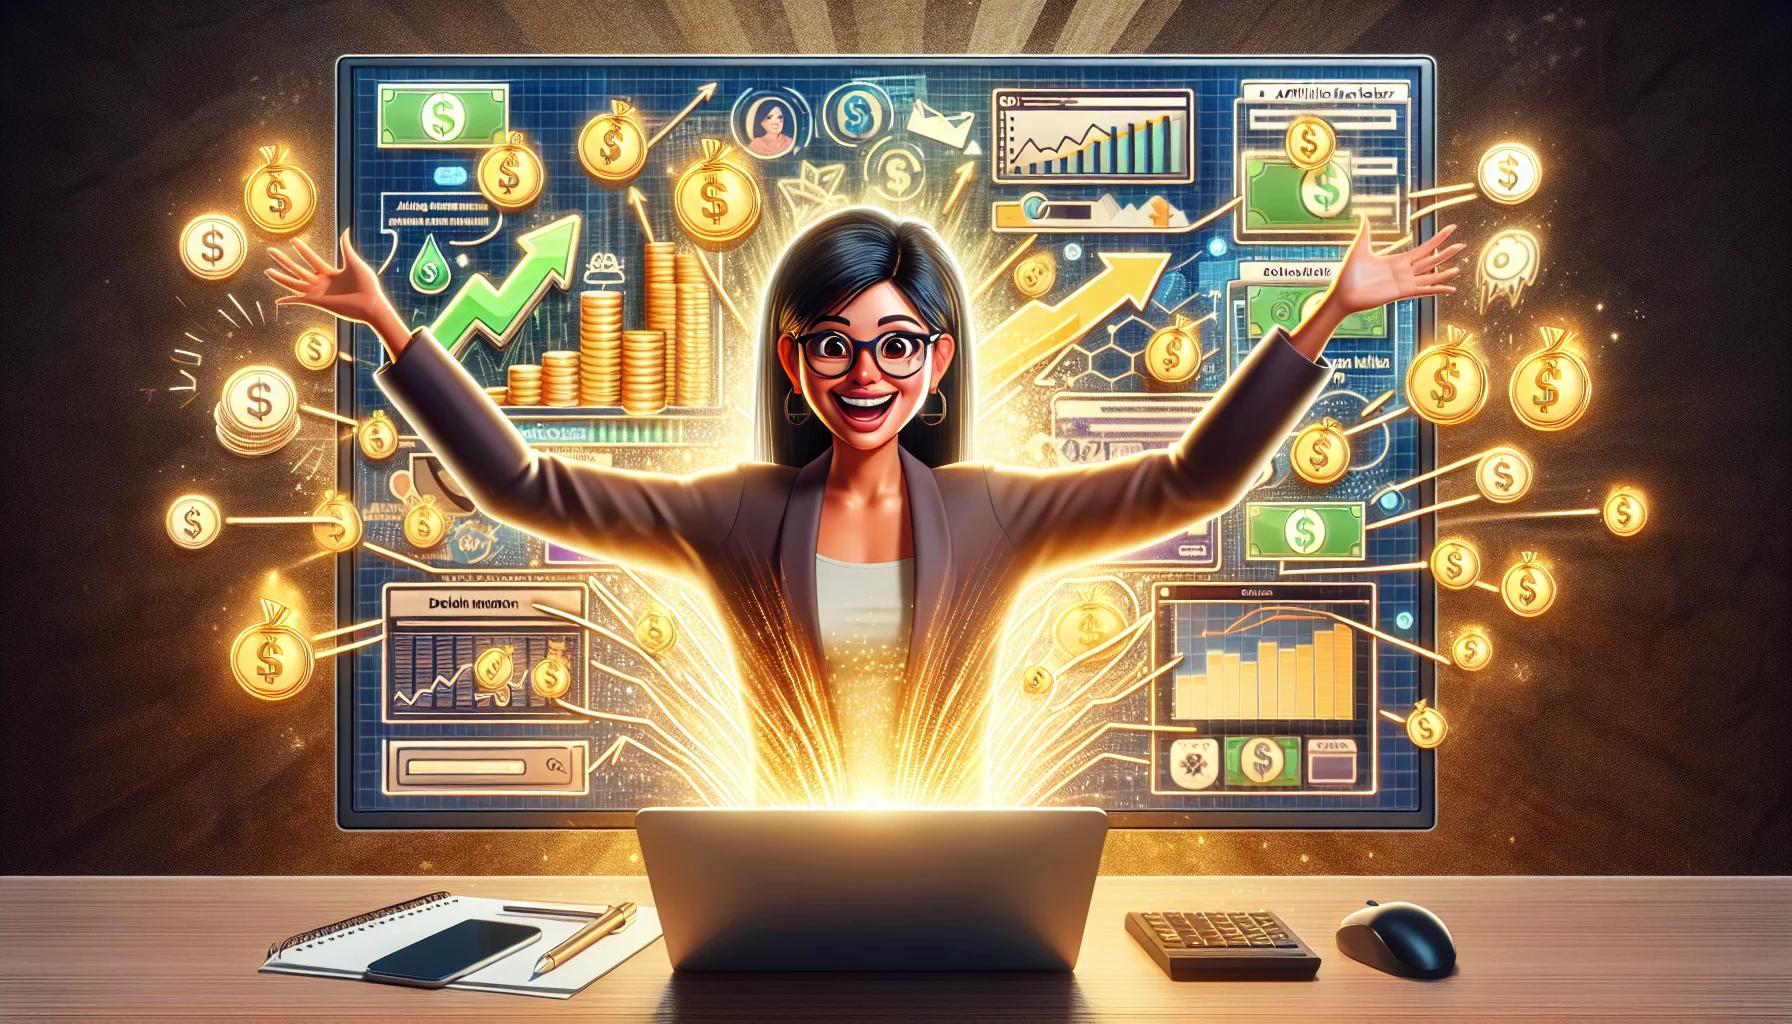 Generate a humorous and realistic image where a character named 'Chelsea', who is an affiliate marketer, is seen in an engaging scenario. She is a South Asian woman, enthusiastically demonstrating various strategies on a large screen for earning money online. She's surrounded by symbolic elements like dollar sign icons, arrows showing upward trends, digital graphs, and website screenshots. A golden glow surrounds her, symbolizing the potential wealth that can be earned through smart online ventures.